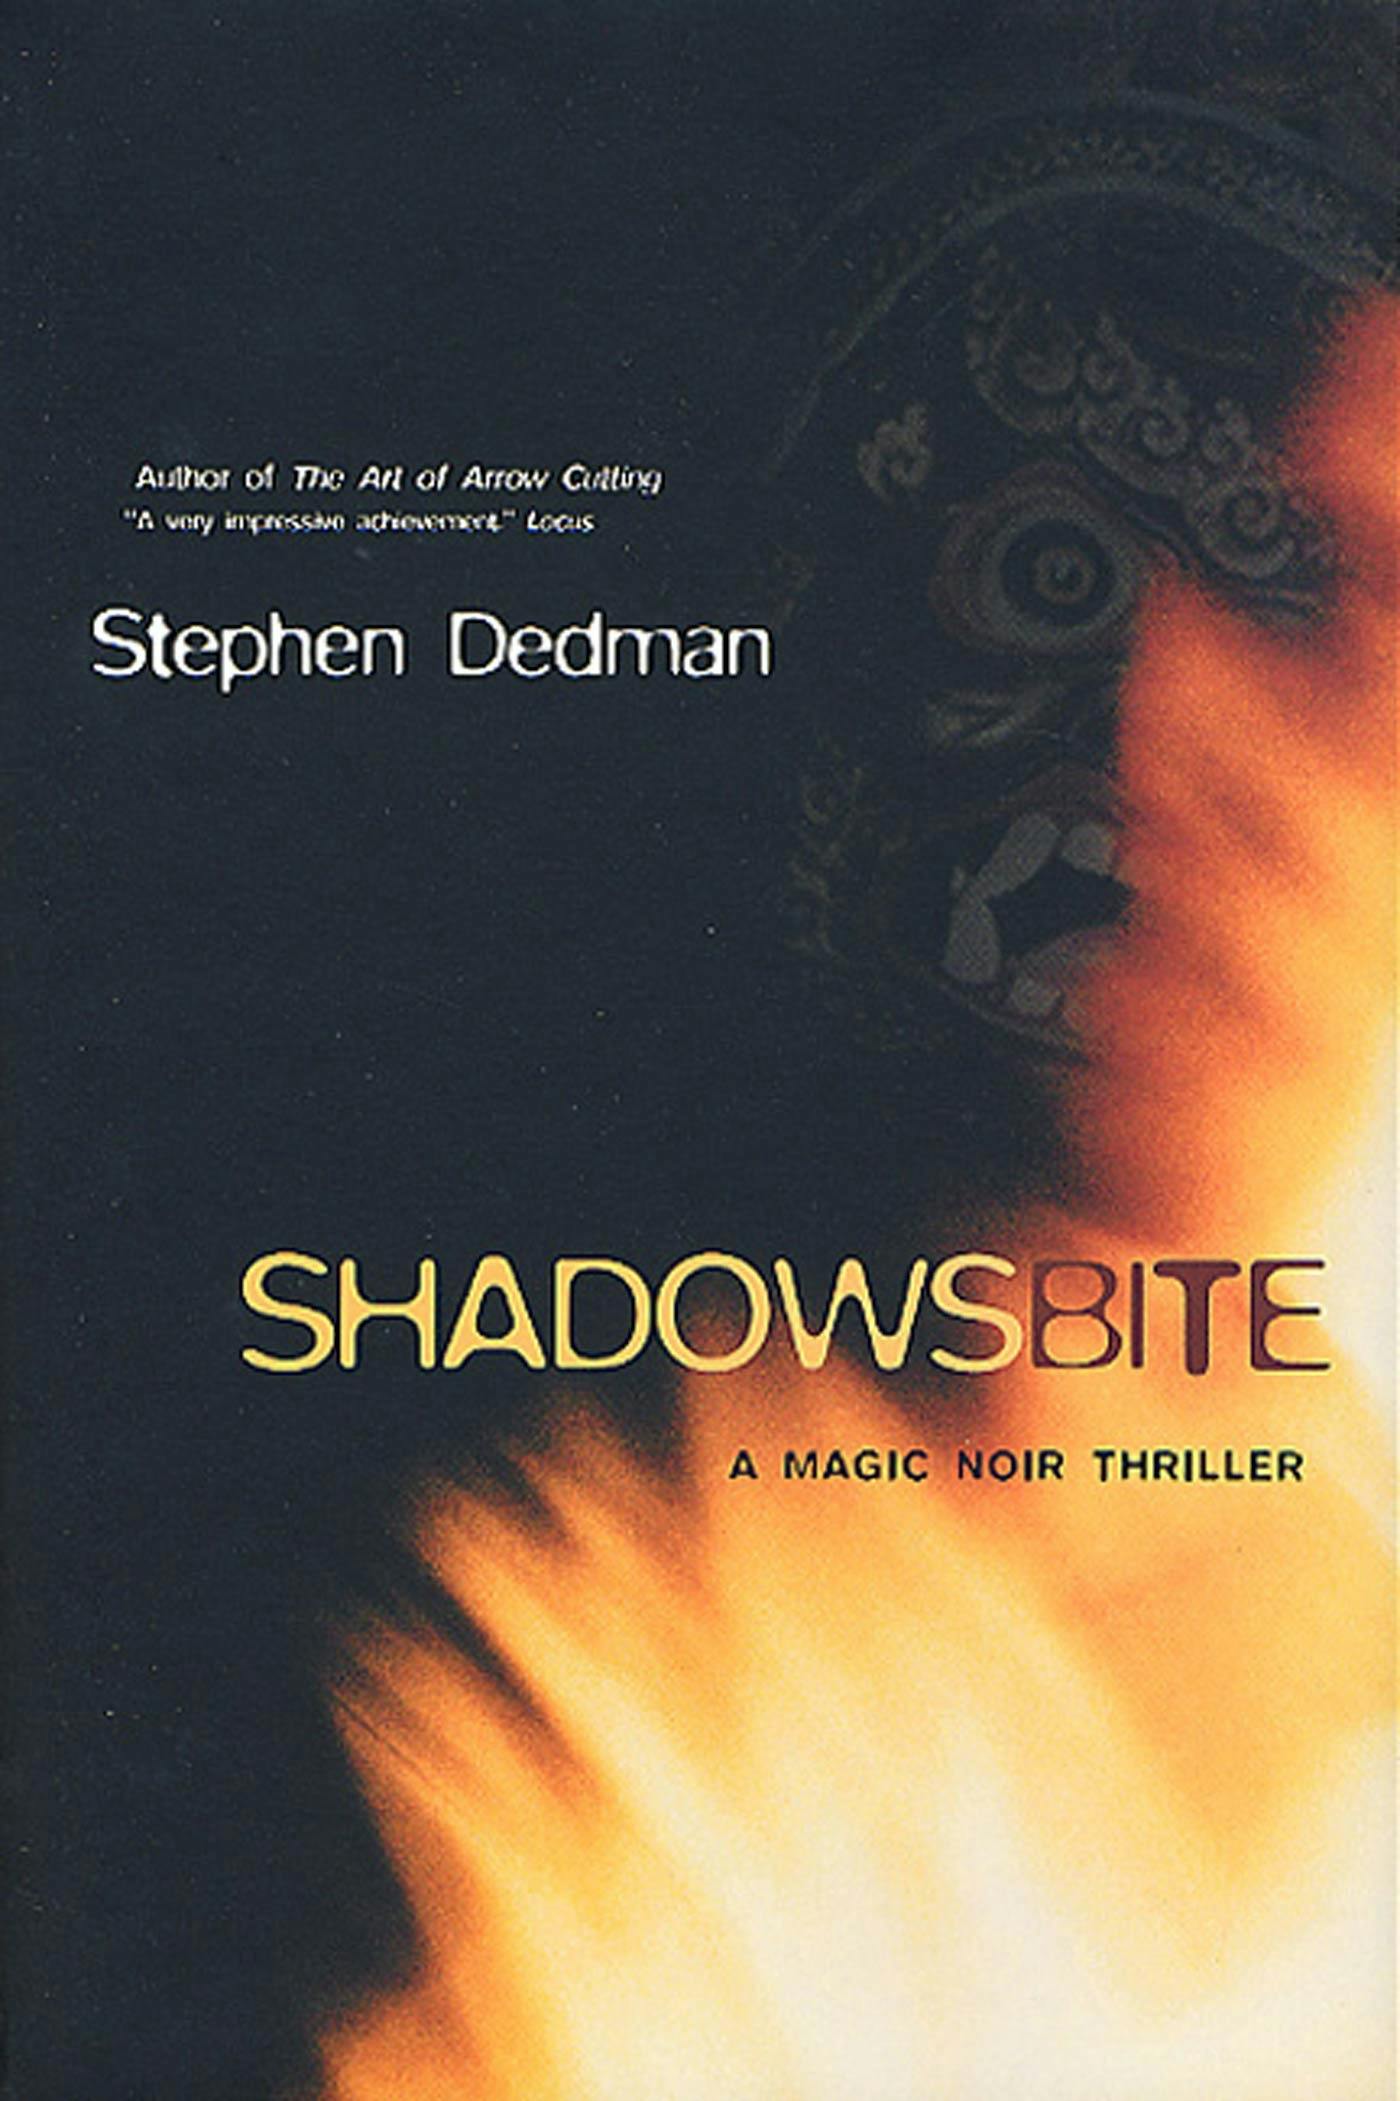 Cover for the book titled as: Shadows Bite